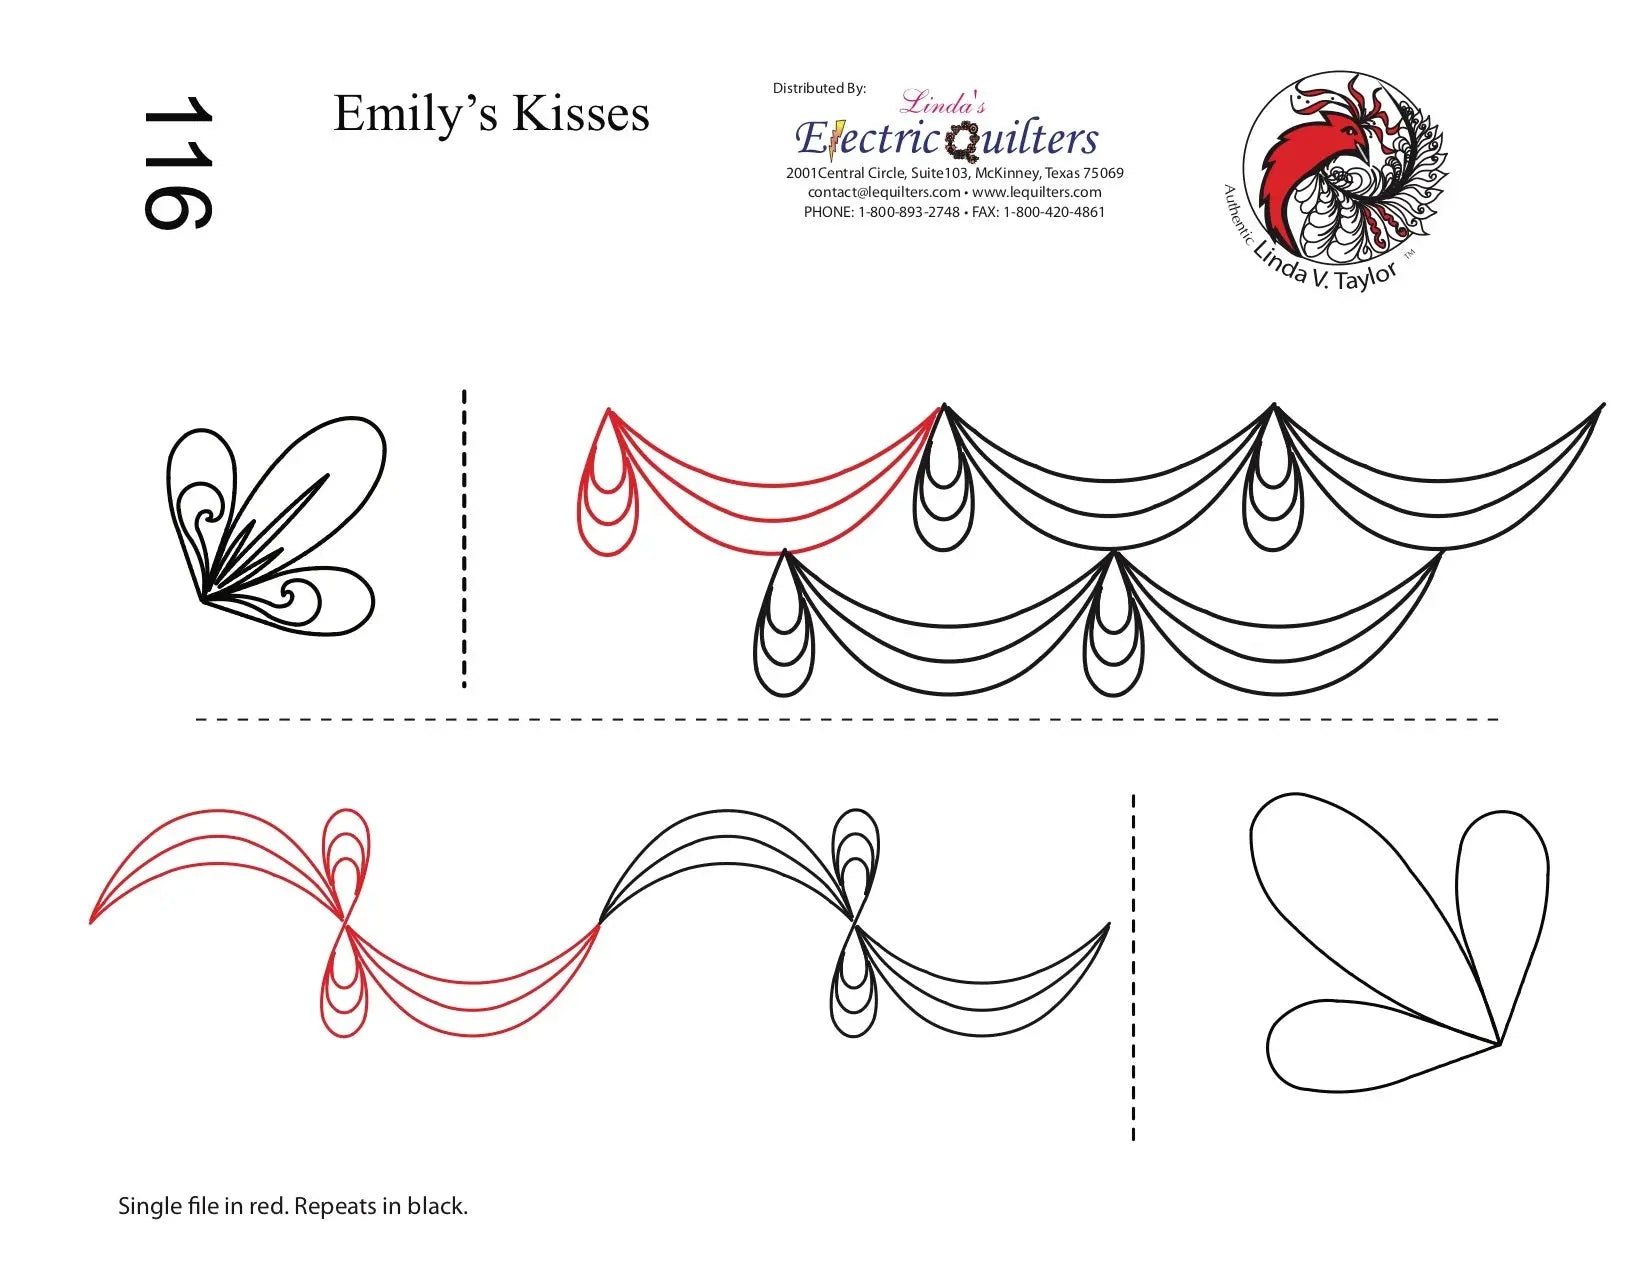 116 Emily's Kisses Pantograph by Linda V. Taylor - Linda's Electric Quilters